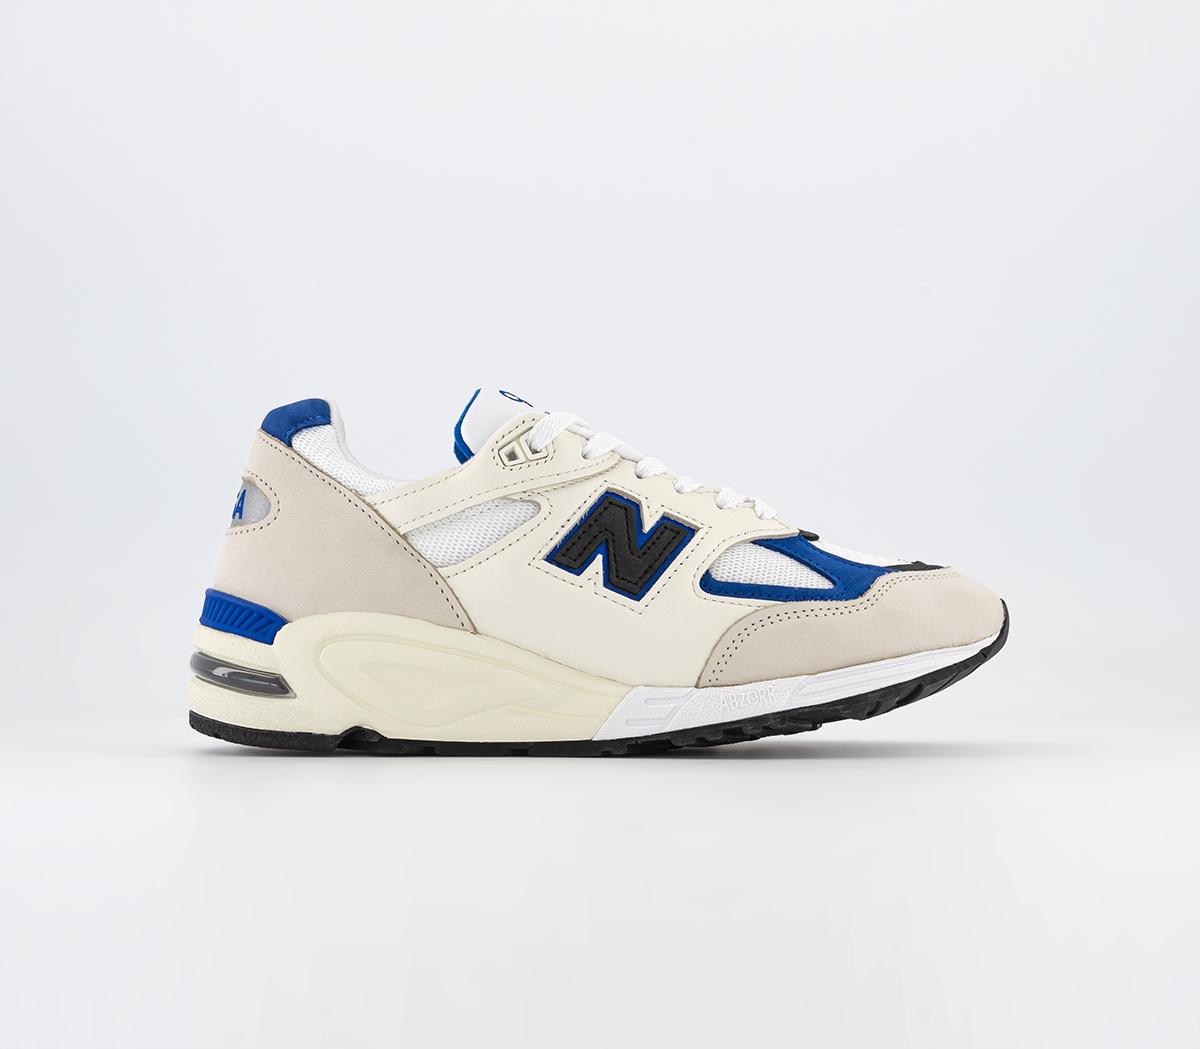 New Balance990v2 Made in USA TrainersWhite